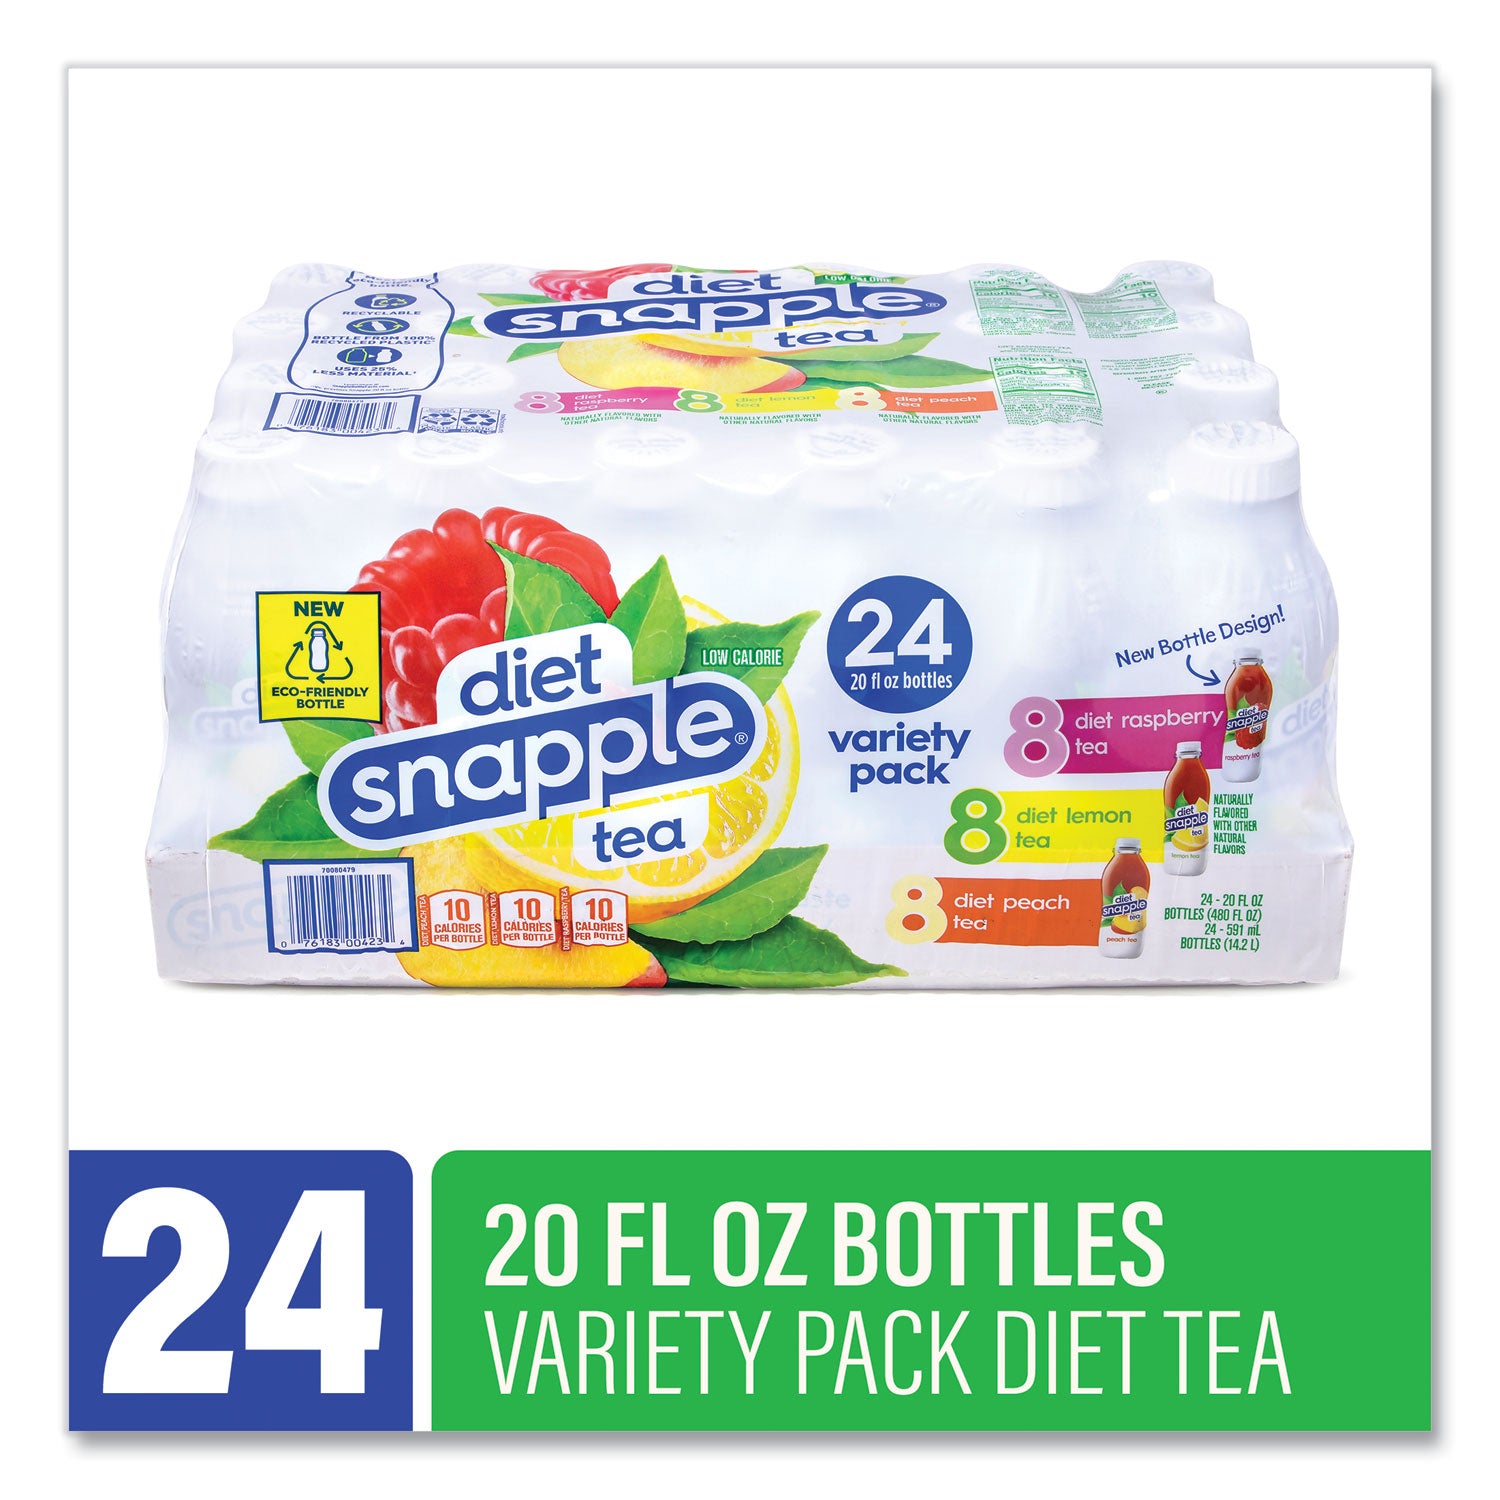 ice-tea-variety-pack-assorted-flavors-20-oz-bottle-24-carton-ships-in-1-3-business-days_grr22002043 - 2